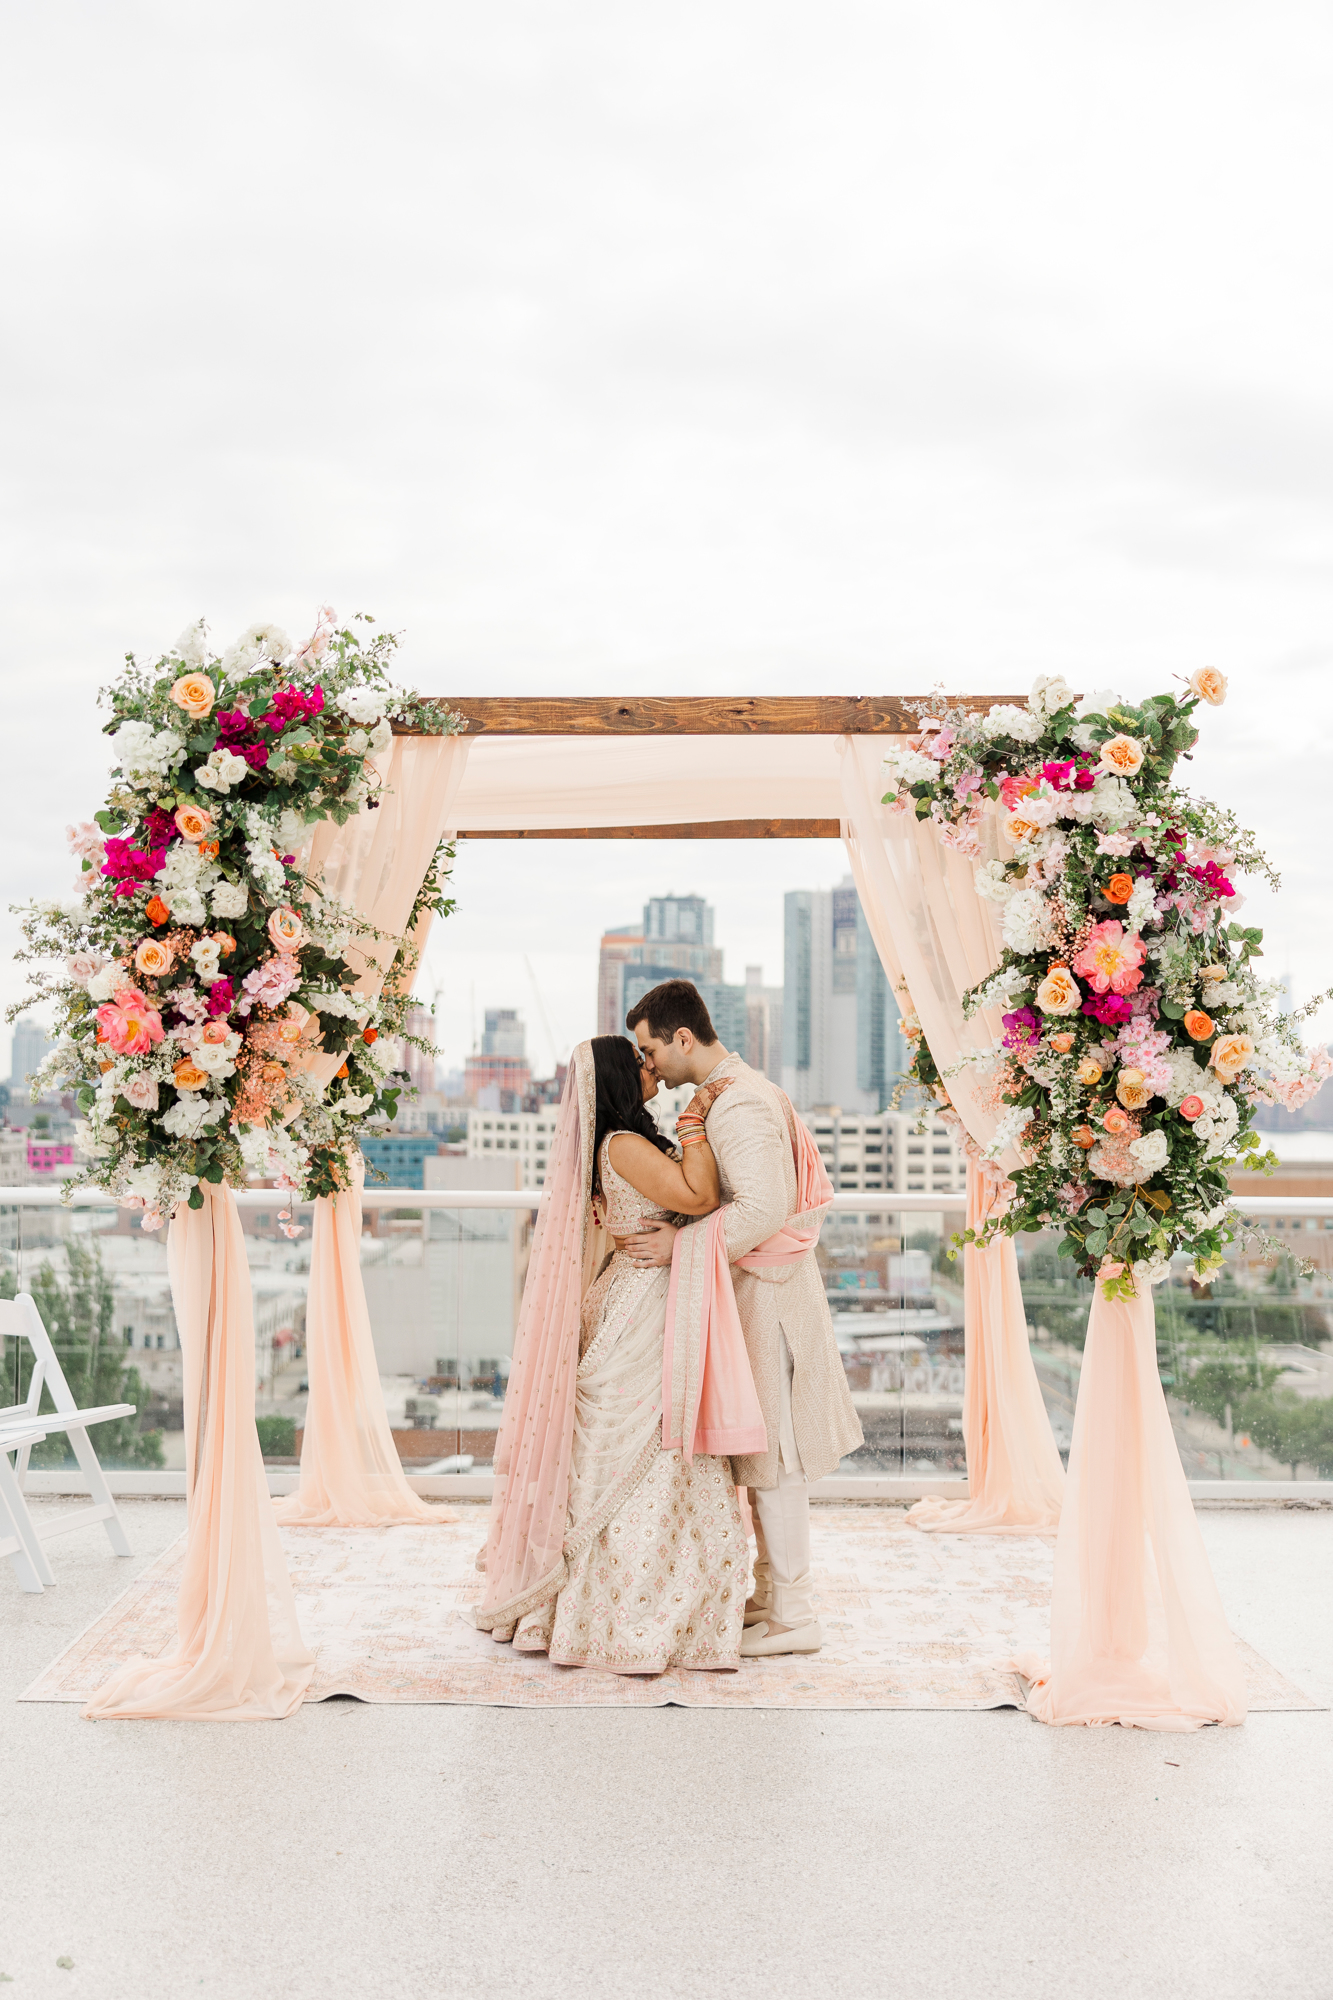 Magical Ravel Hotel Wedding in a Peachy, Pastel Palette